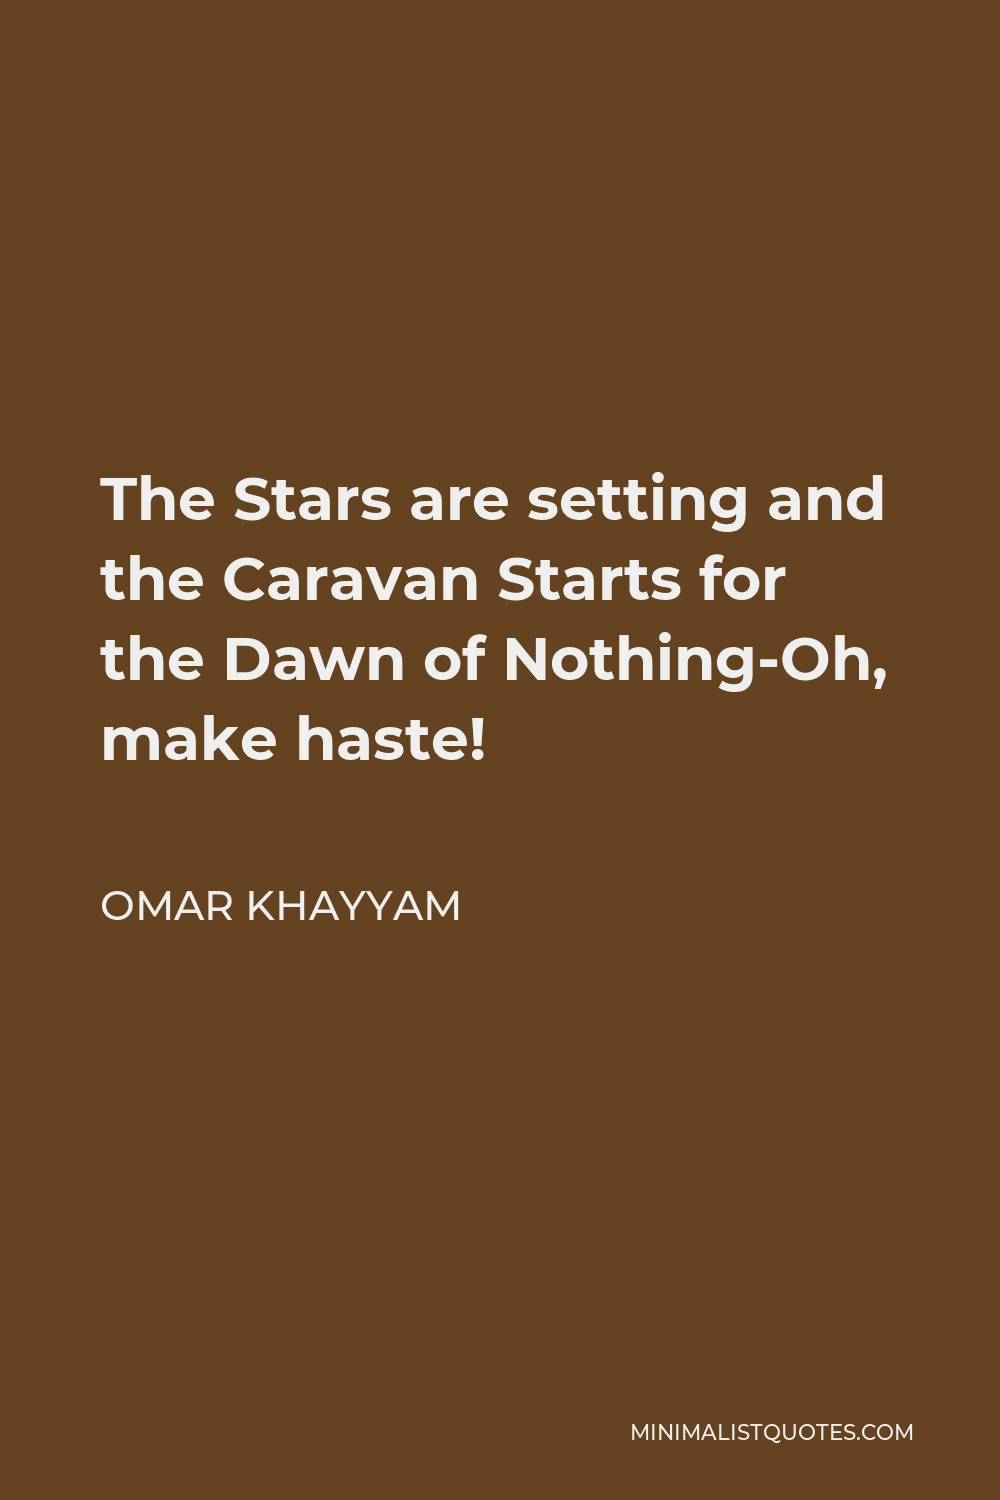 Omar Khayyam Quote - The Stars are setting and the Caravan Starts for the Dawn of Nothing-Oh, make haste!